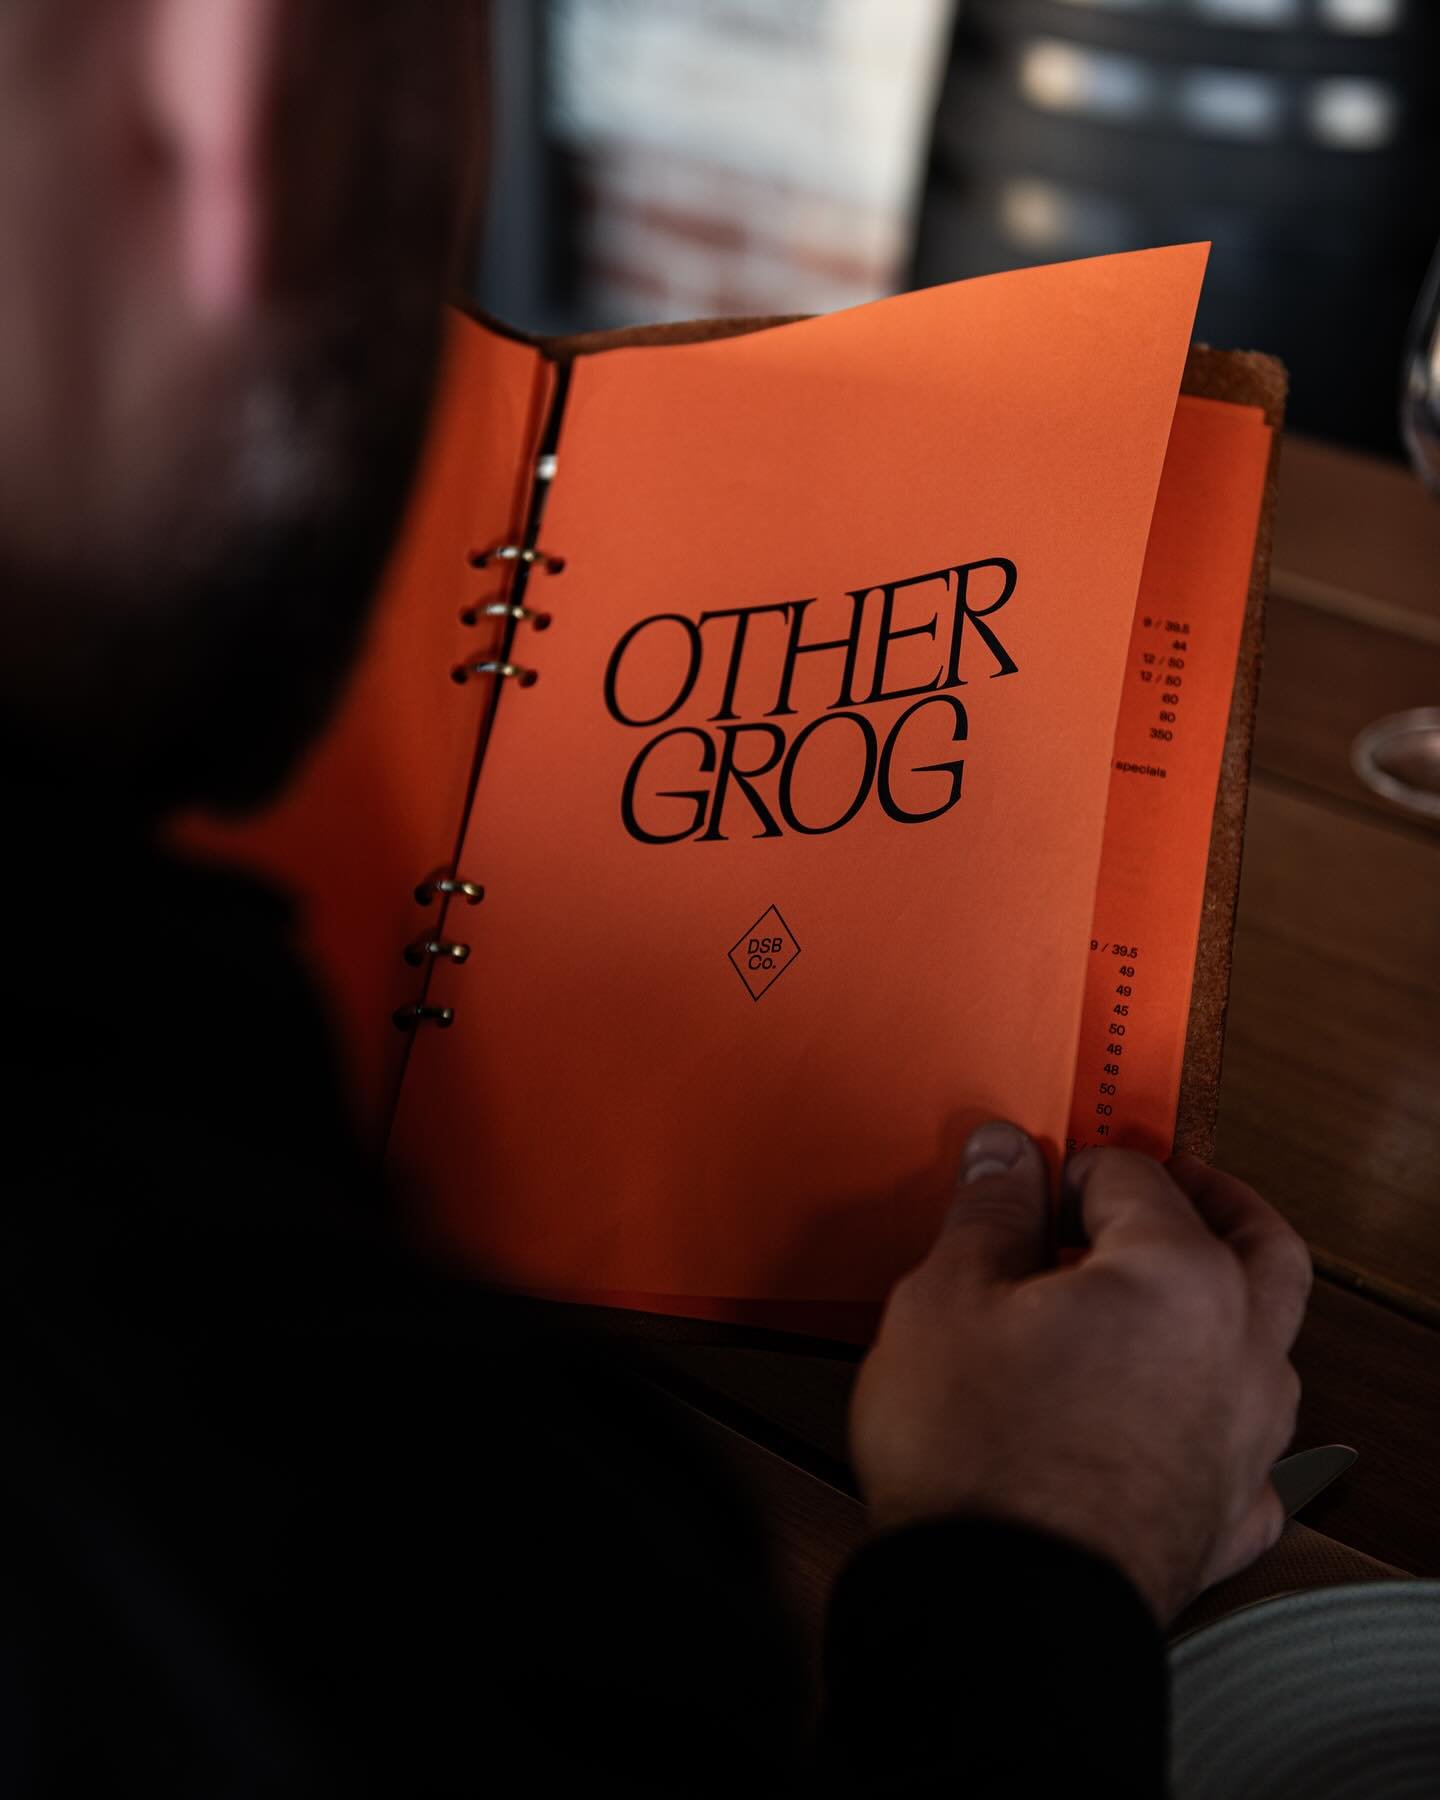 OTHER GROG: It&rsquo;s not all just beer at the brewery. Our drinks list features a fantastic selection of Tassie&rsquo;s finest wines, spirits and non-alc options. 

Kitchen open from 4pm today. Trivia kicks off at 7pm upstairs in the mezzanine.

#b